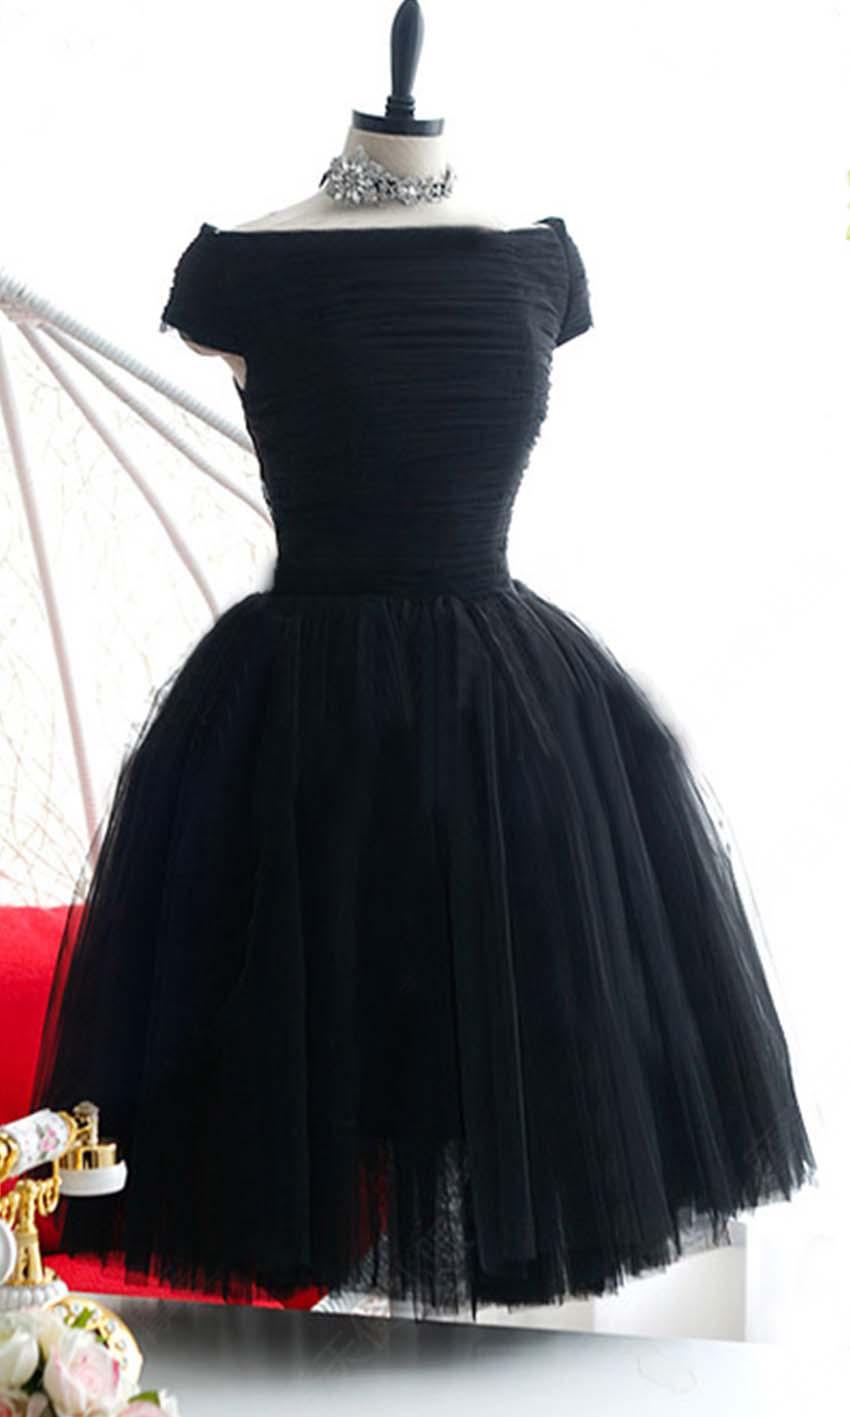 Свадьба - Vintage Off The Shoulder Little Black Dress KSP352- £88.00 : Cheap Prom Dresses Uk, Bridesmaid Dresses, 2014 Prom & Evening Dresses, Look for cheap elegant prom dresses 2014, cocktail gowns, or dresses for special occasions? kissprom.co.uk offers various 